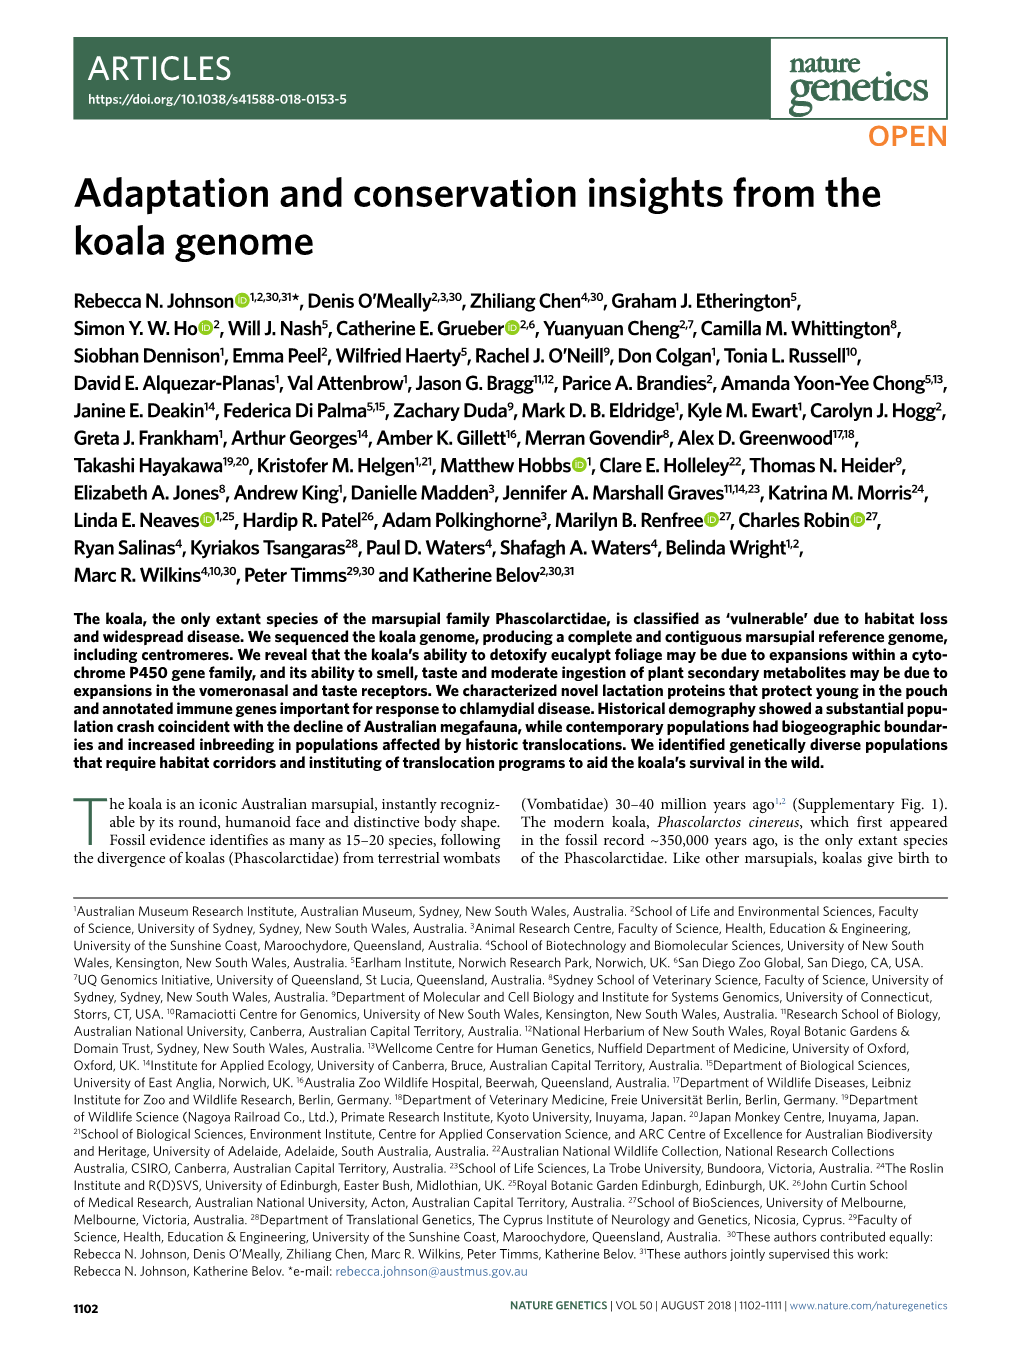 Adaptation and Conservation Insights from the Koala Genome